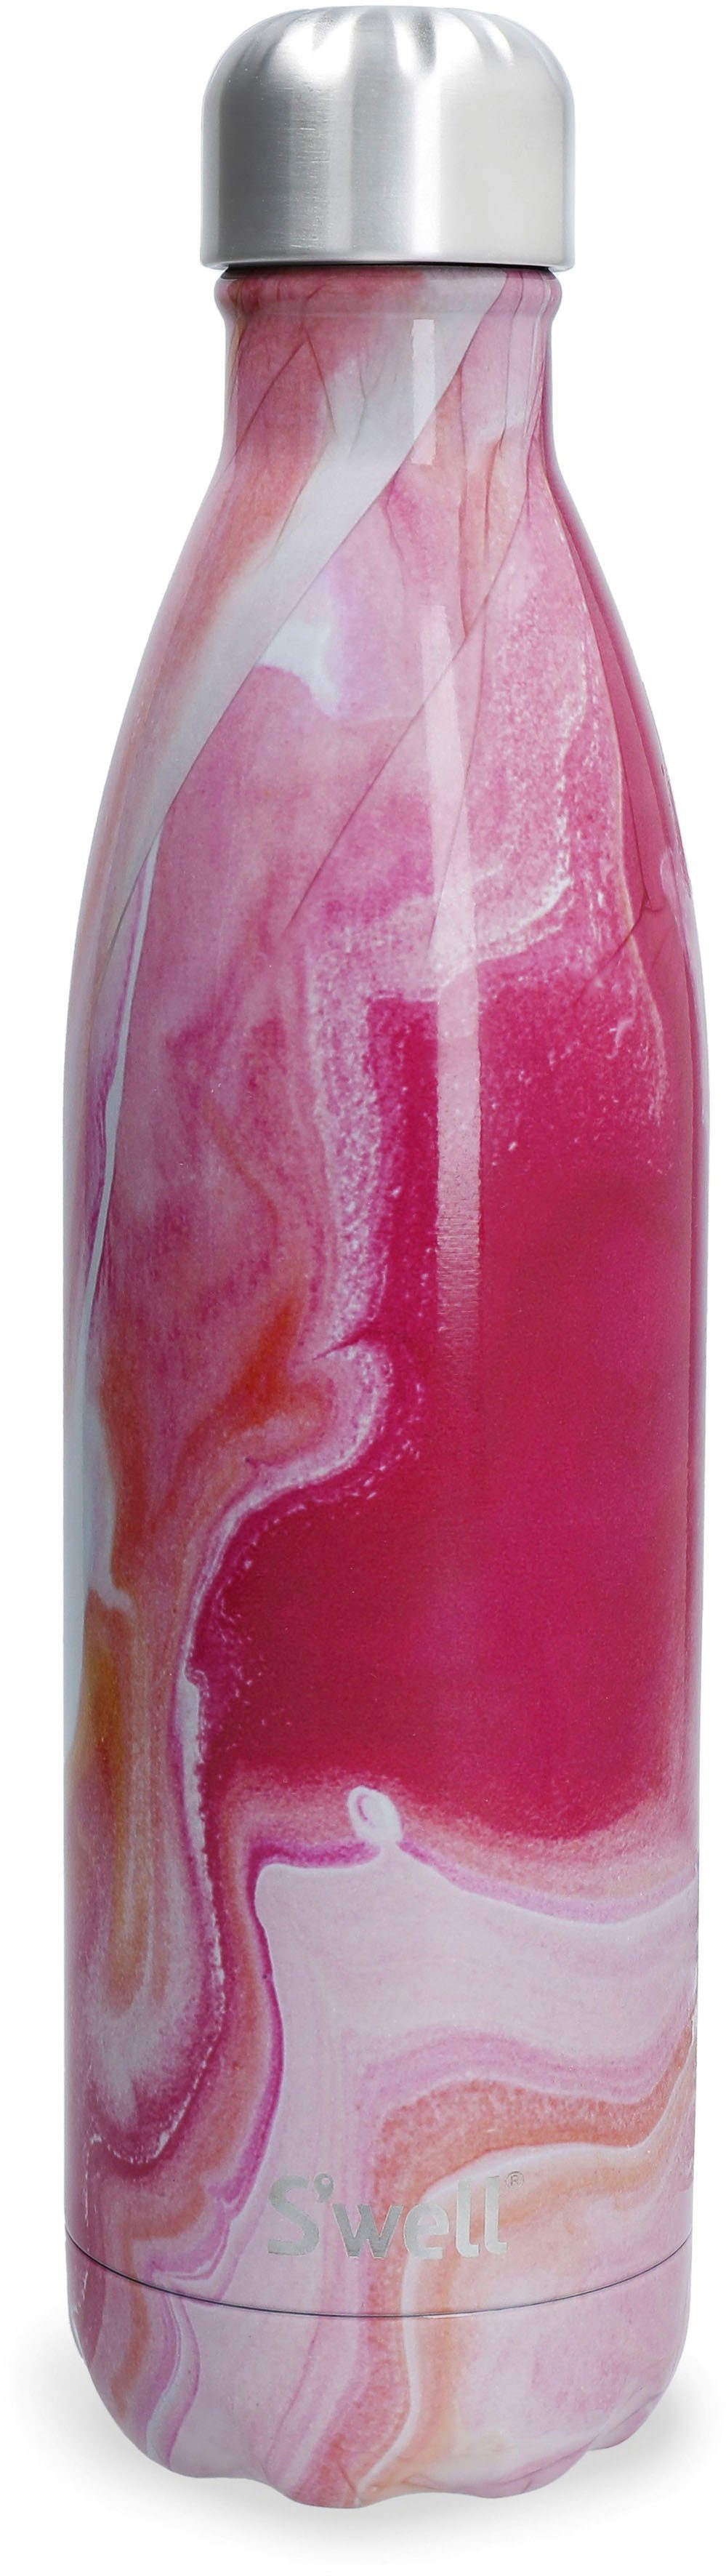 S'well Isolierflasche S'well Topaz, 750 ml Rose Agate